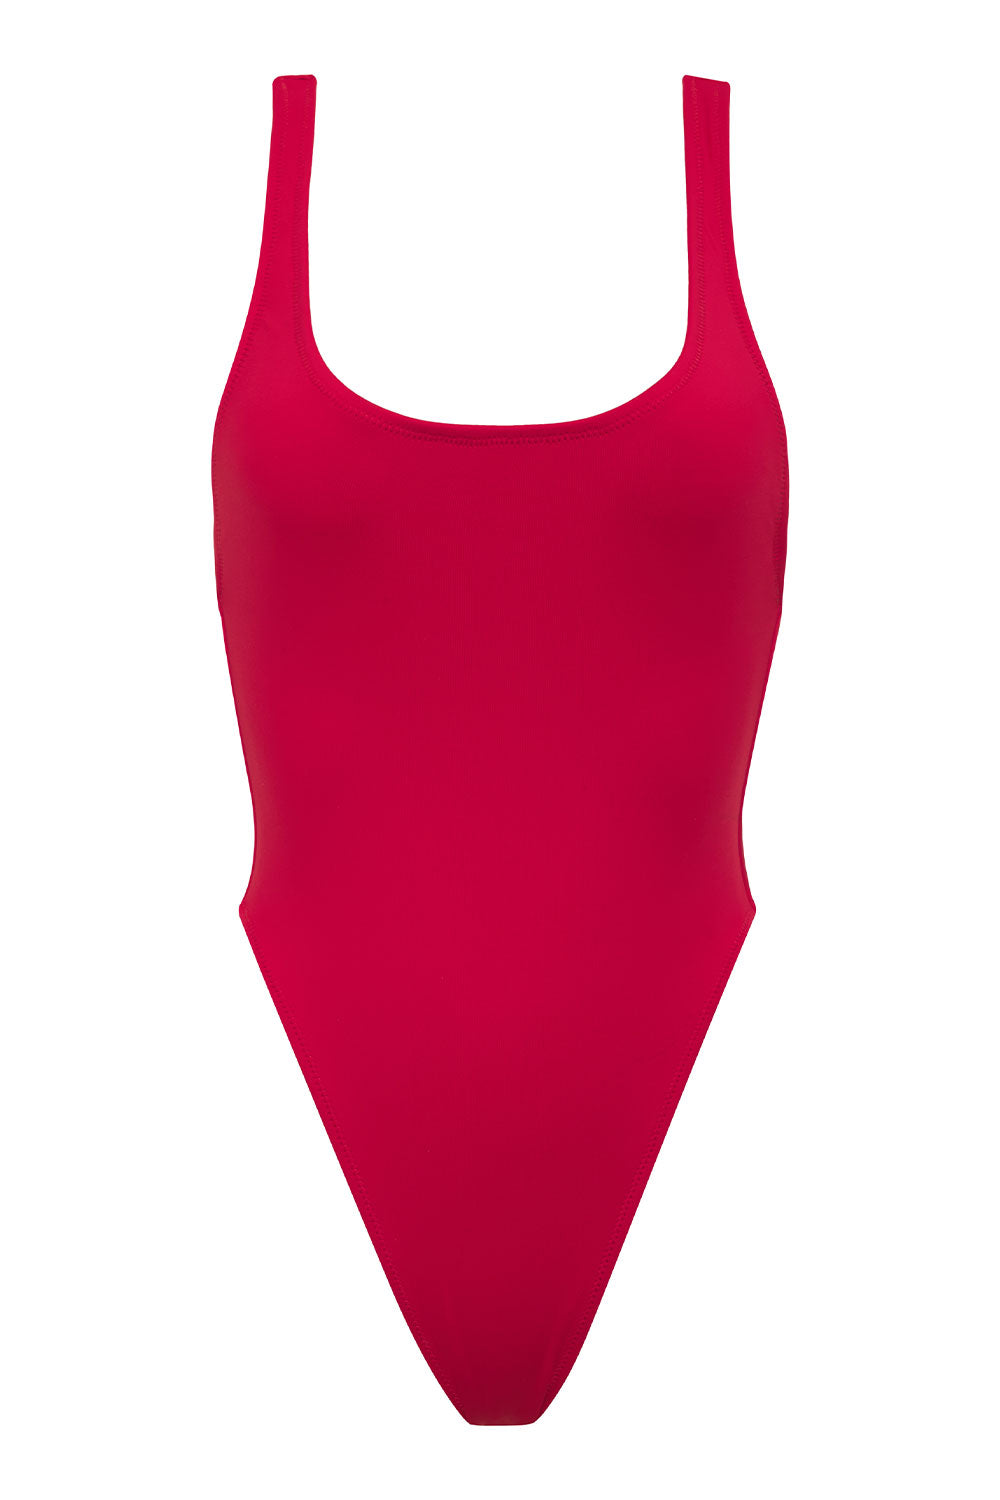 x PAMELA ANDERSON Pamela Cheeky One Piece Swimsuit - Anderson Red